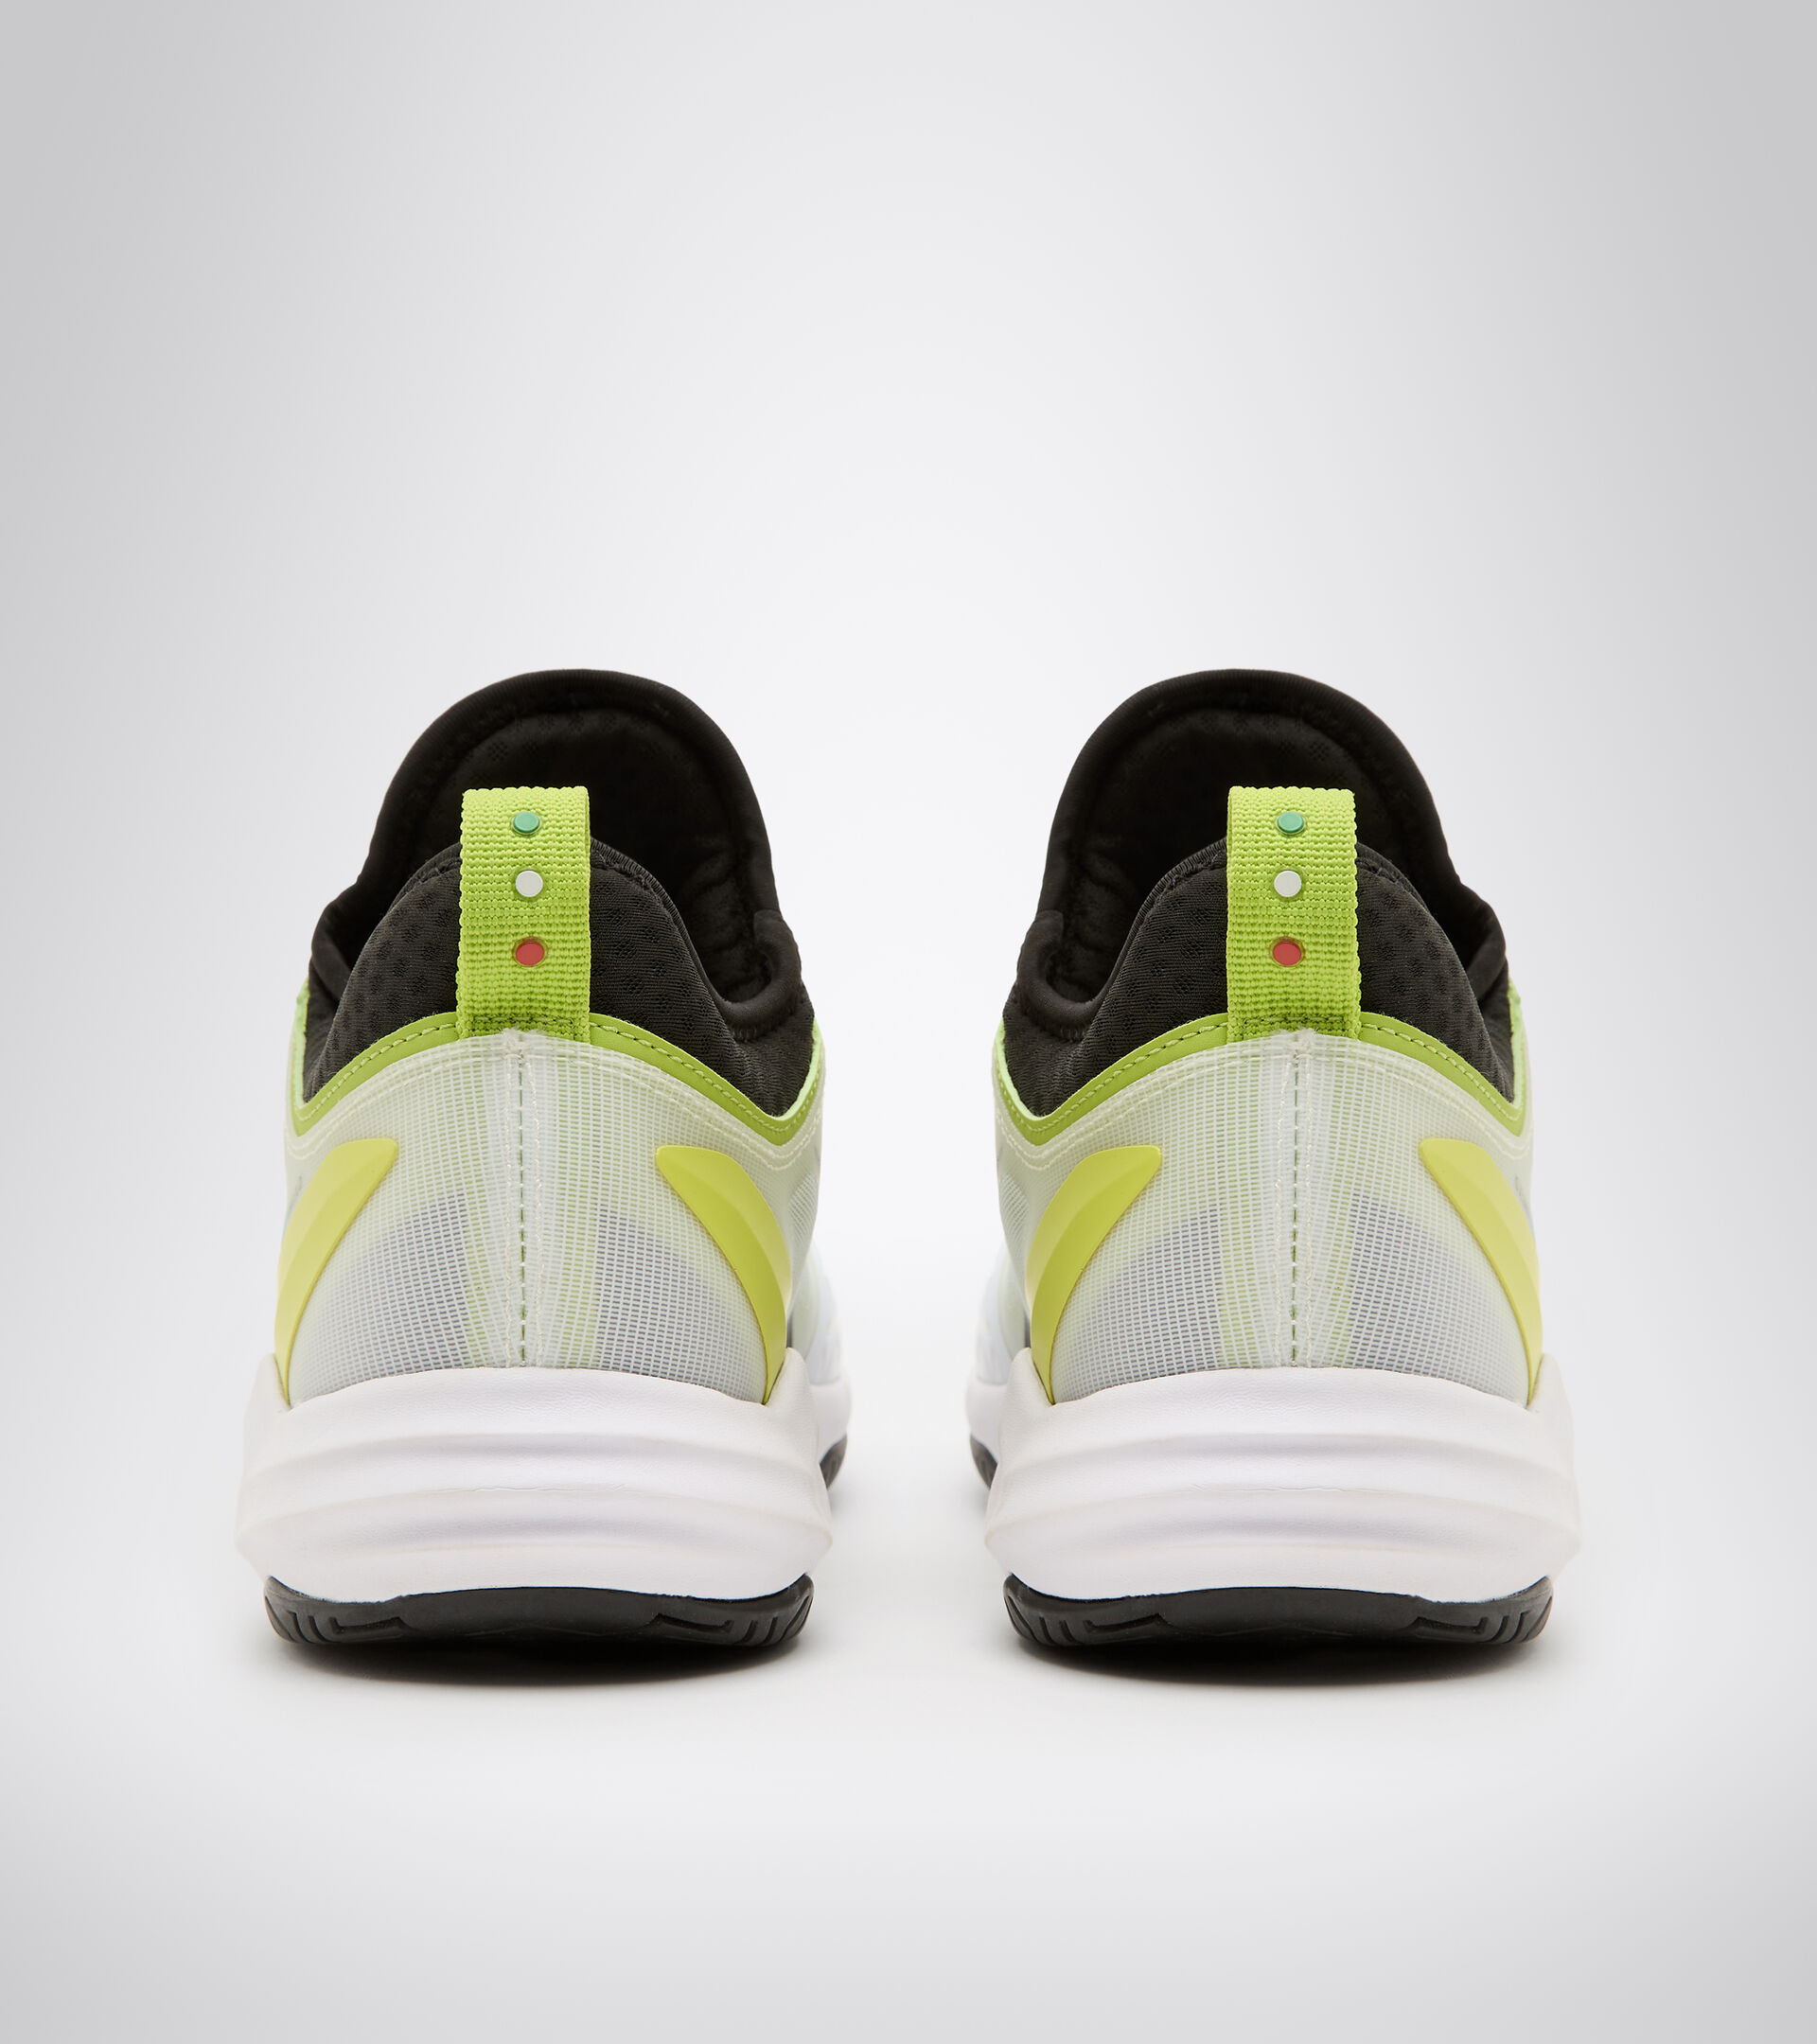 Clay and hard court tennis shoe - Men SPEED BLUSHIELD FLY 3 + AG WHITE/BLACK/LIME GREEN - Diadora